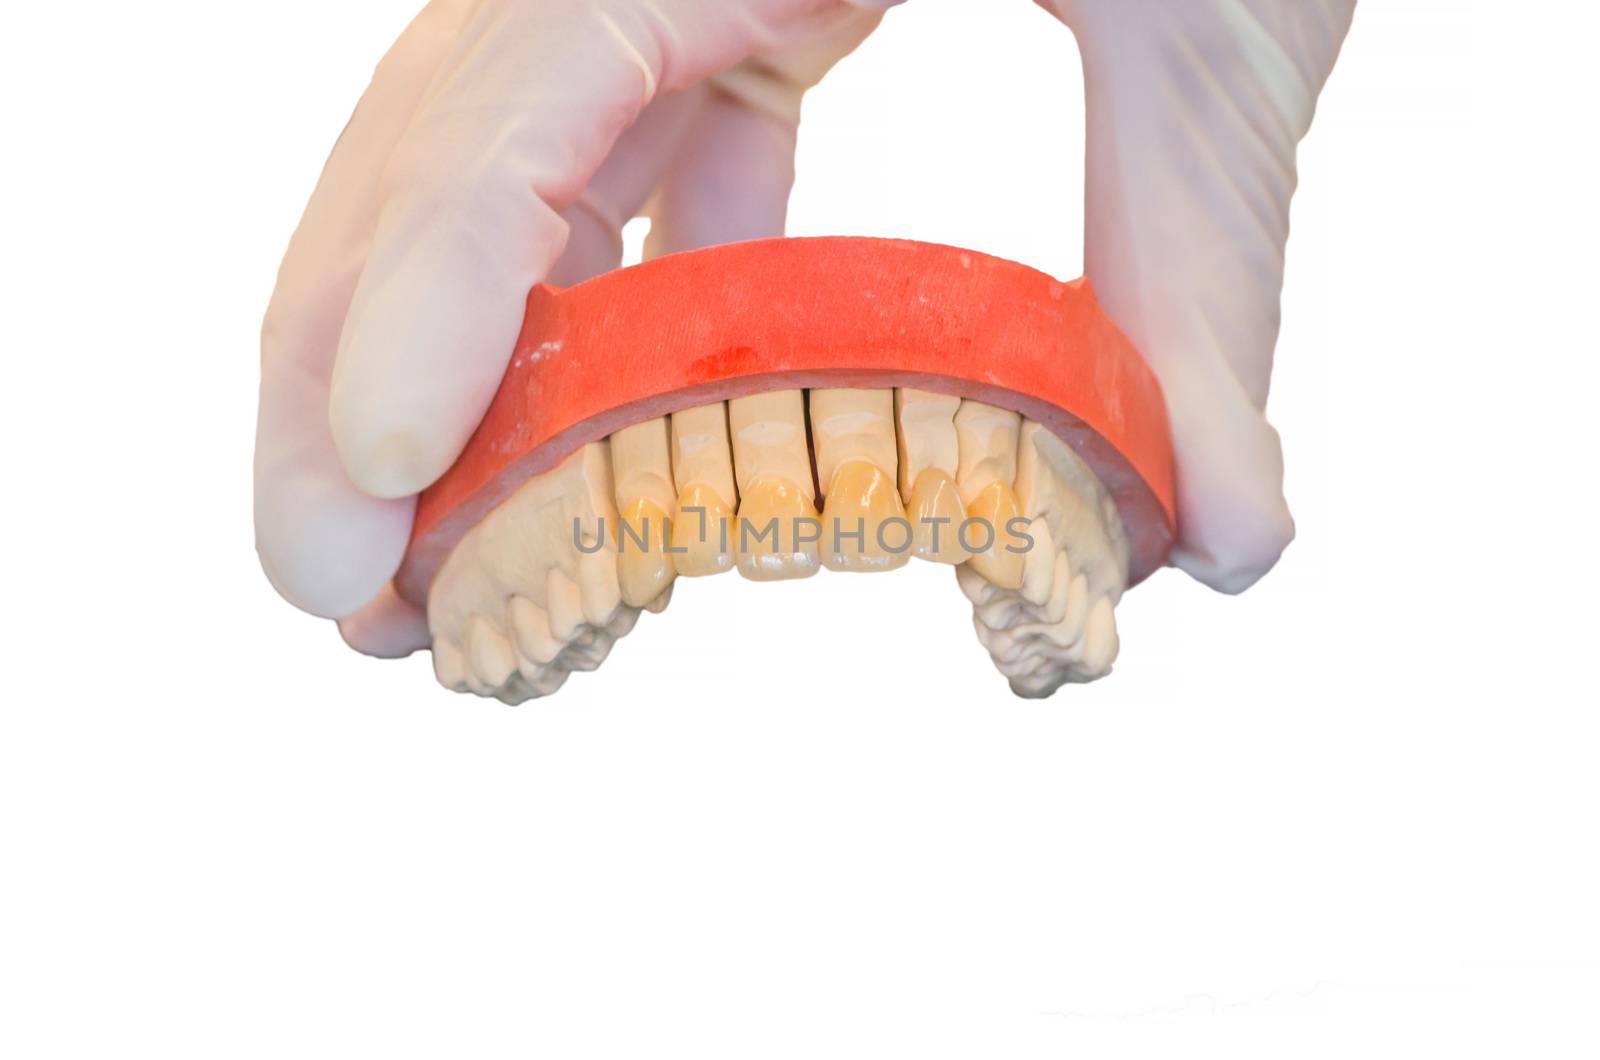 Dentures, prosthesis and oral hygiene. Hands with gloves while working on a dental prosthesis.